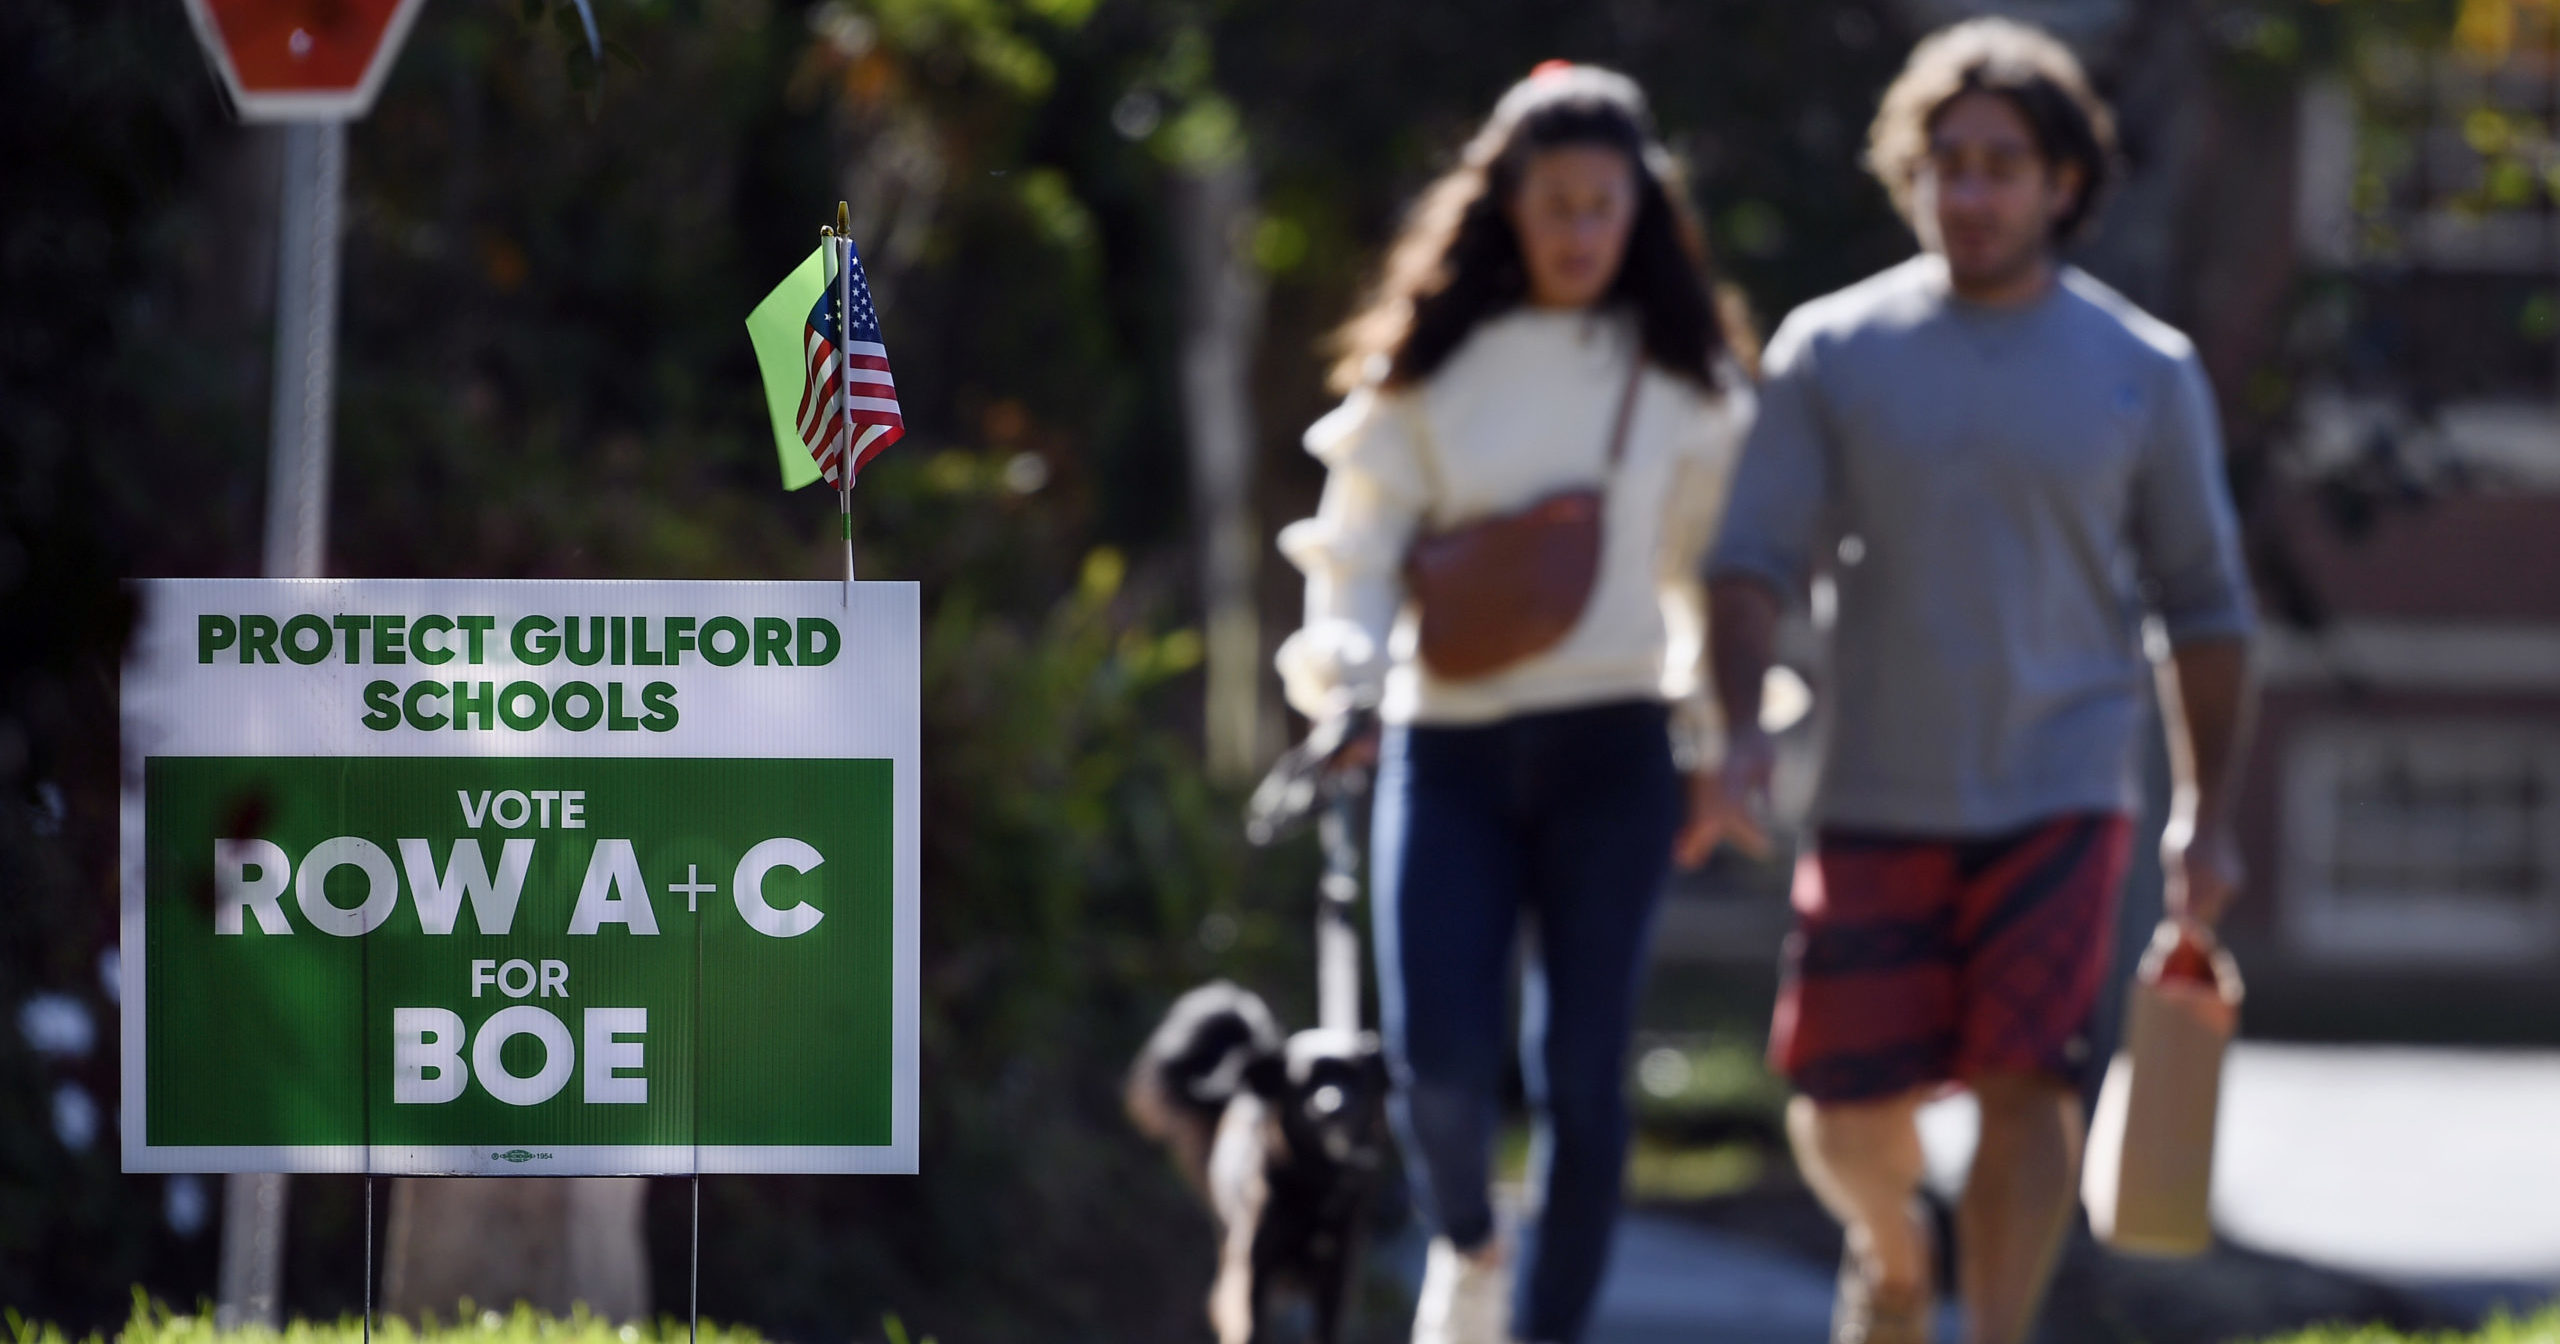 People walk near one of many signs around town centered around the upcoming Nov. 2 election in schools in Guilford, Connecticut on Tuesday.